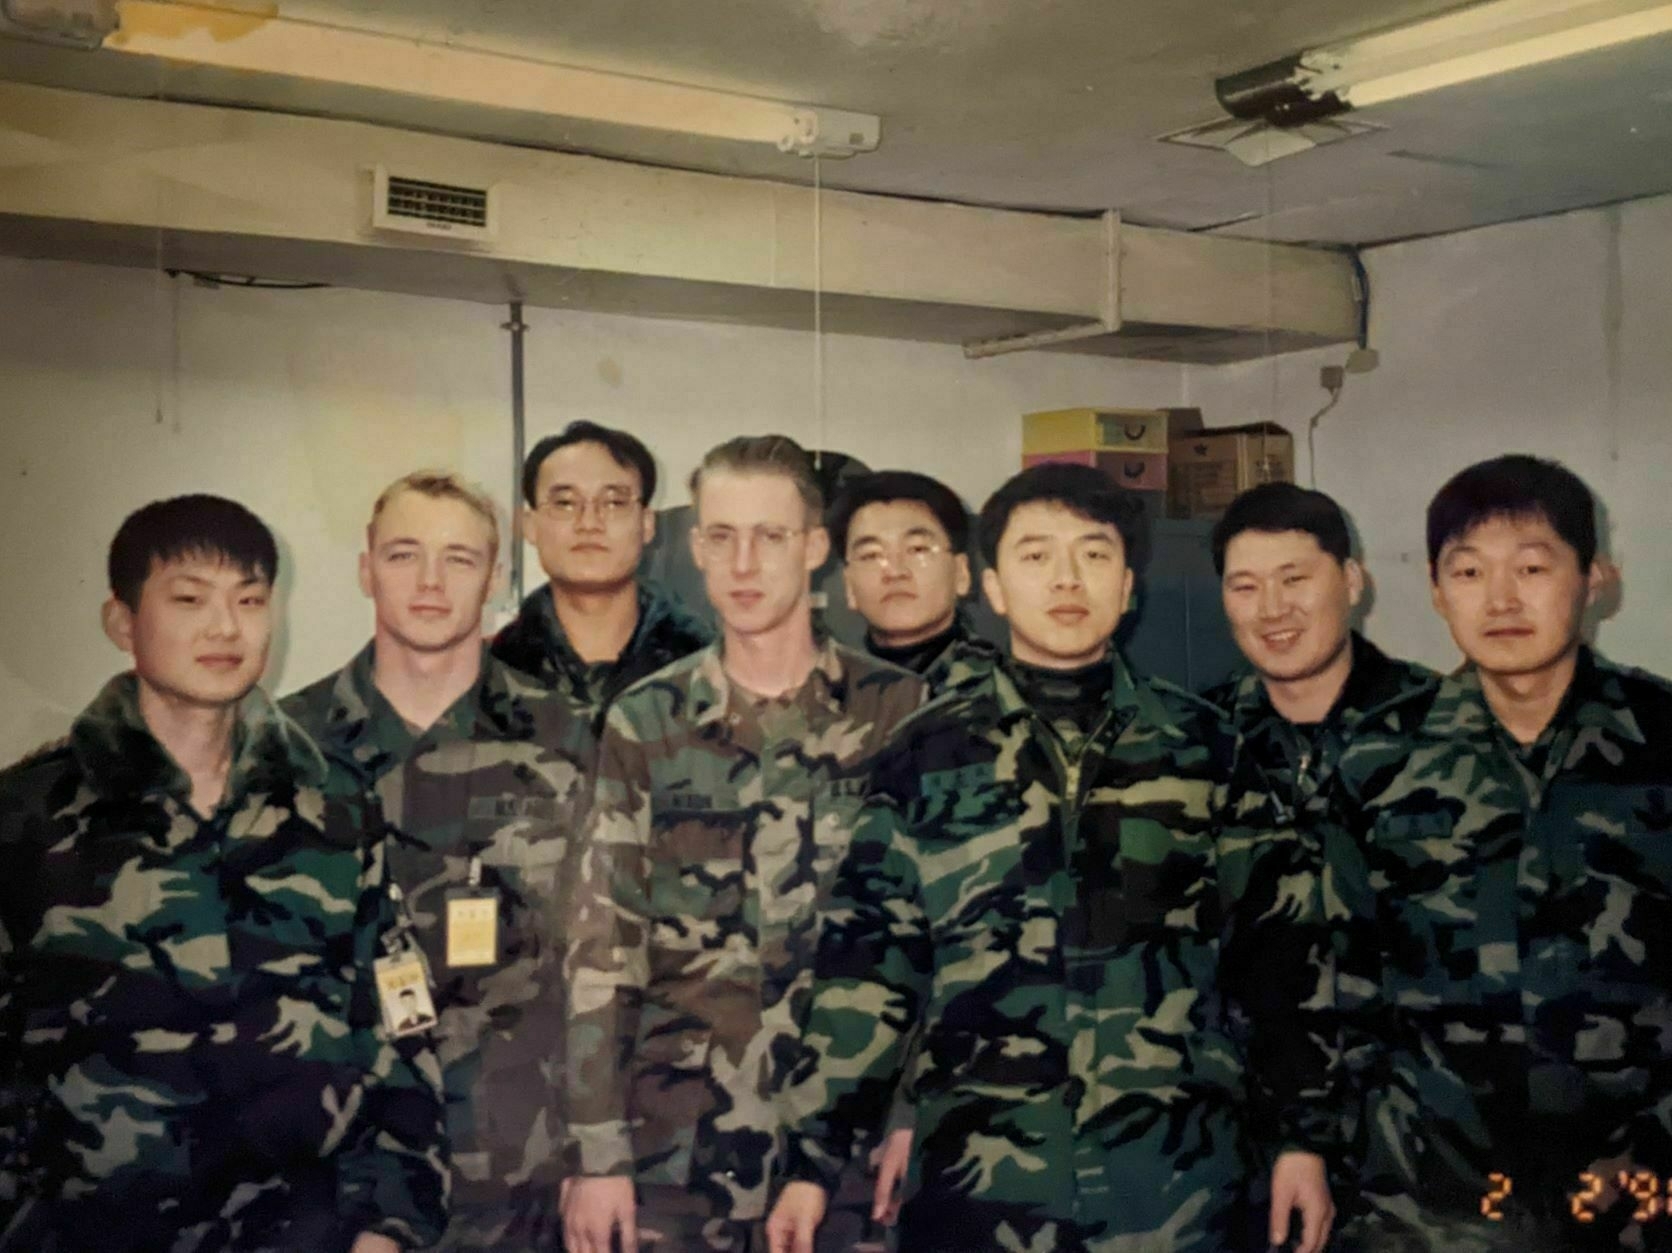 Eight soldiers, 6 Korean, 1 me, and 1 a random American